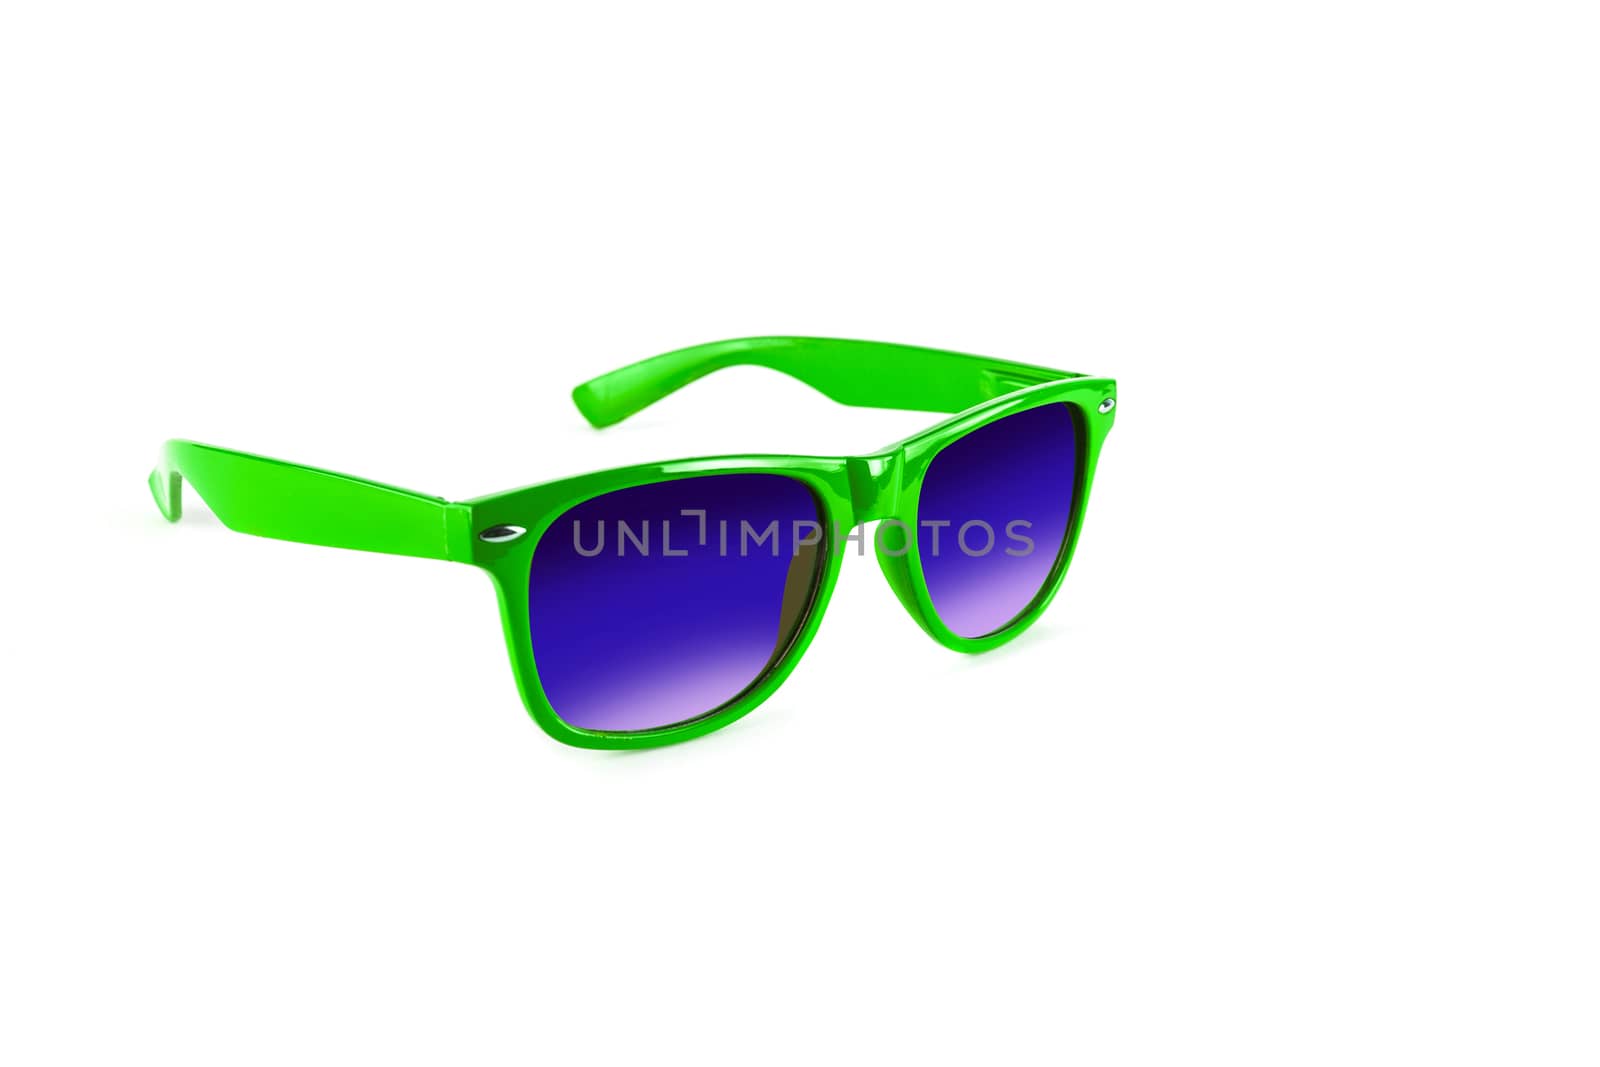 Green sunglasses to protect your eyes from the sun isolated on white background